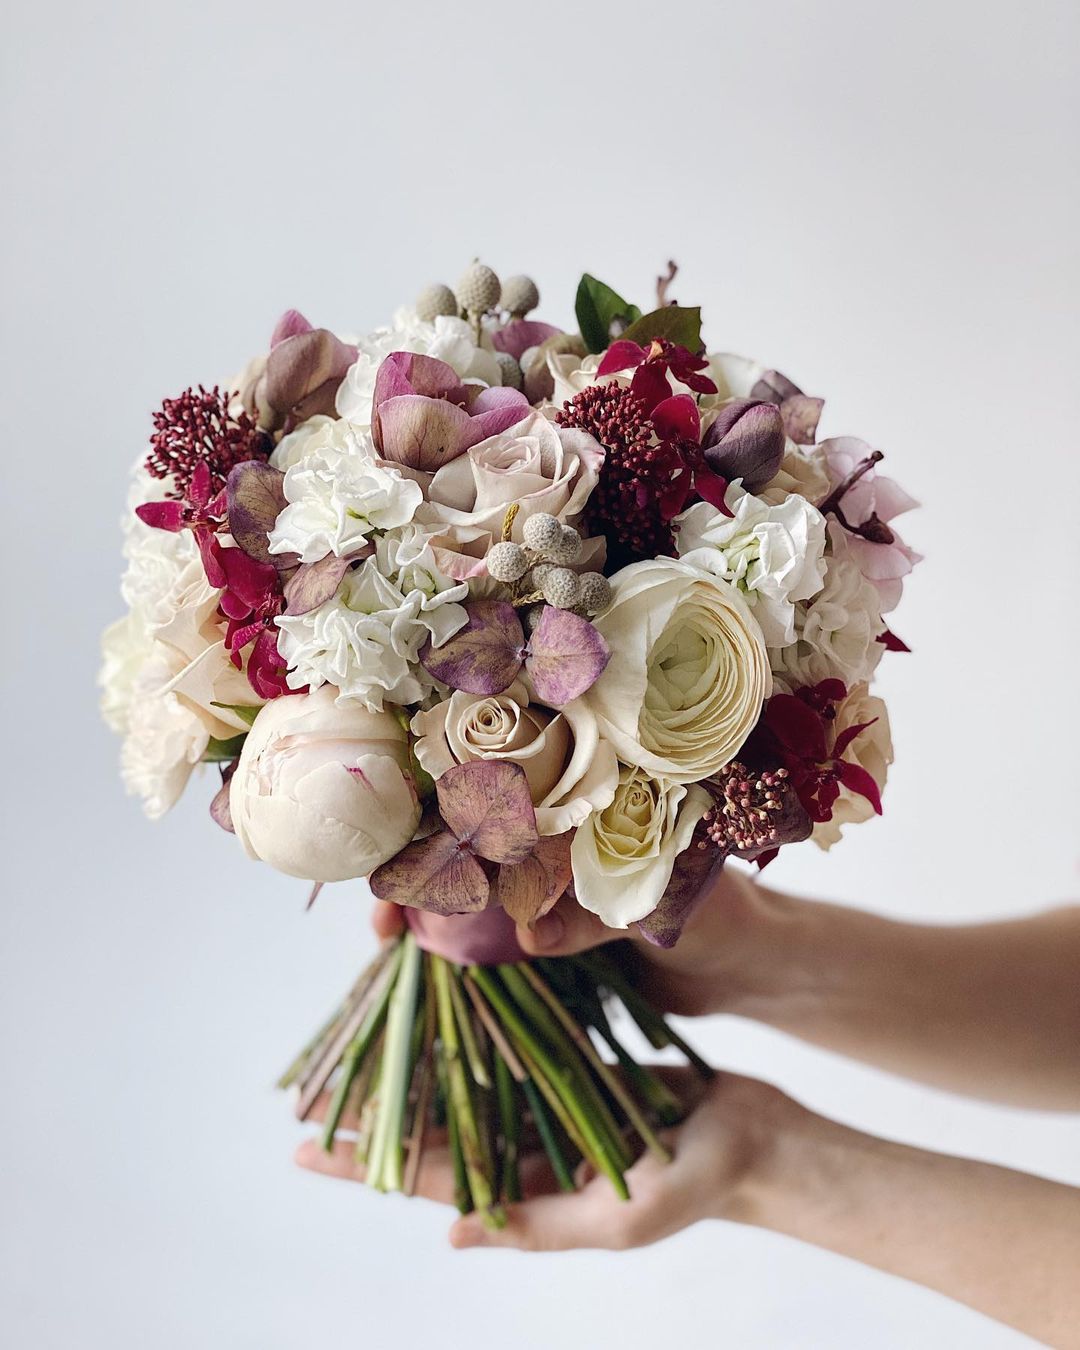 wedding bouquet ideas inspiration bouquet ideas with peonies